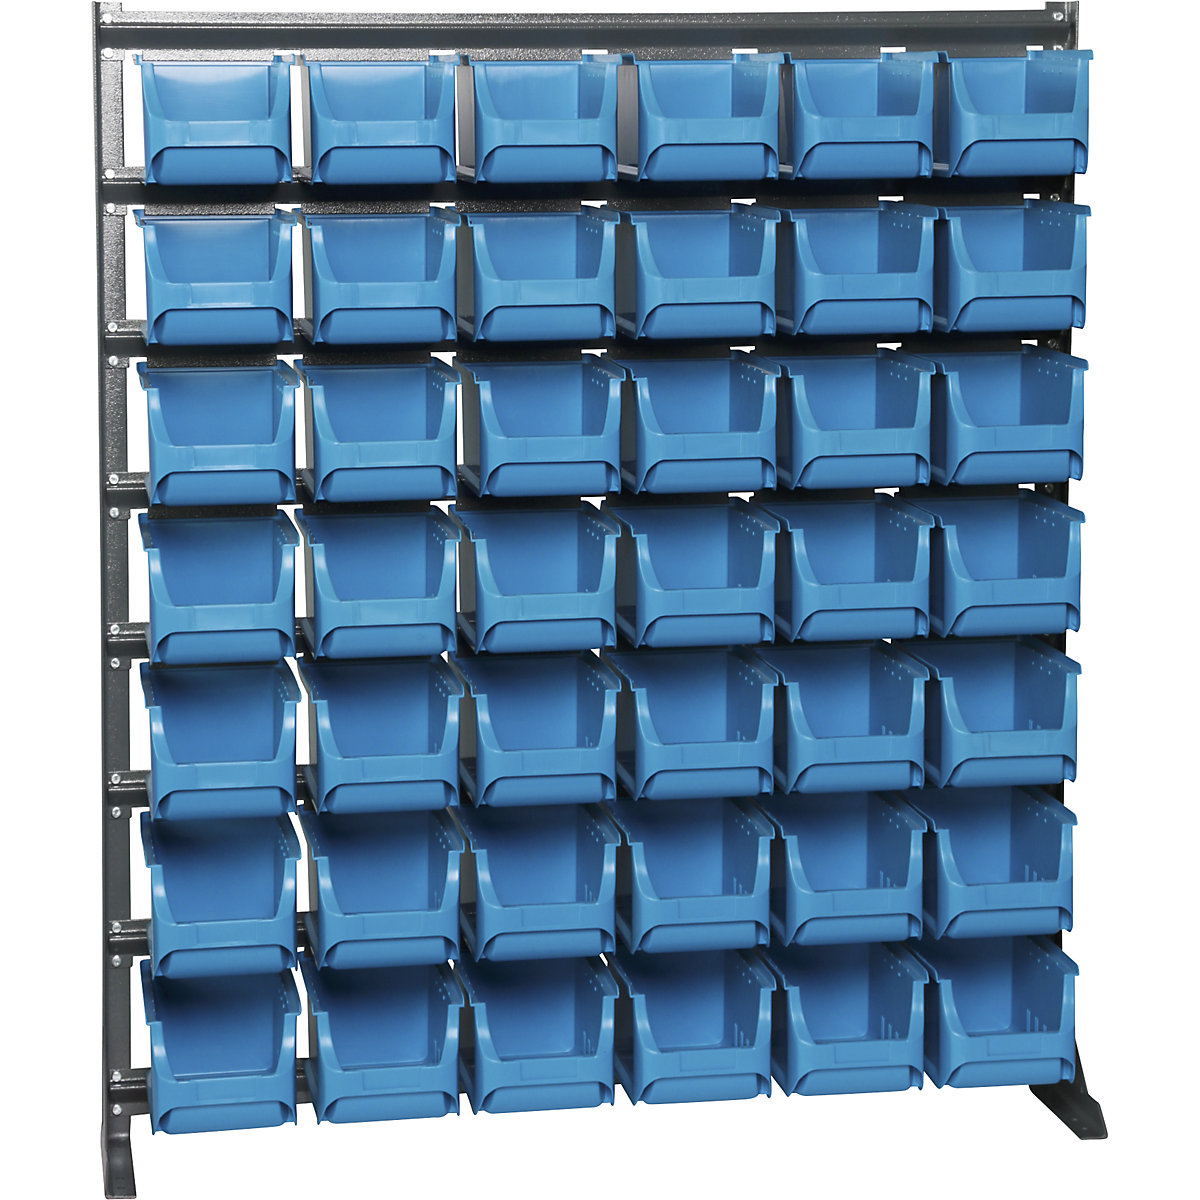 Small parts shelf unit, width 1020 mm, with open fronted storage bins, HxD 1160 x 235 mm-1